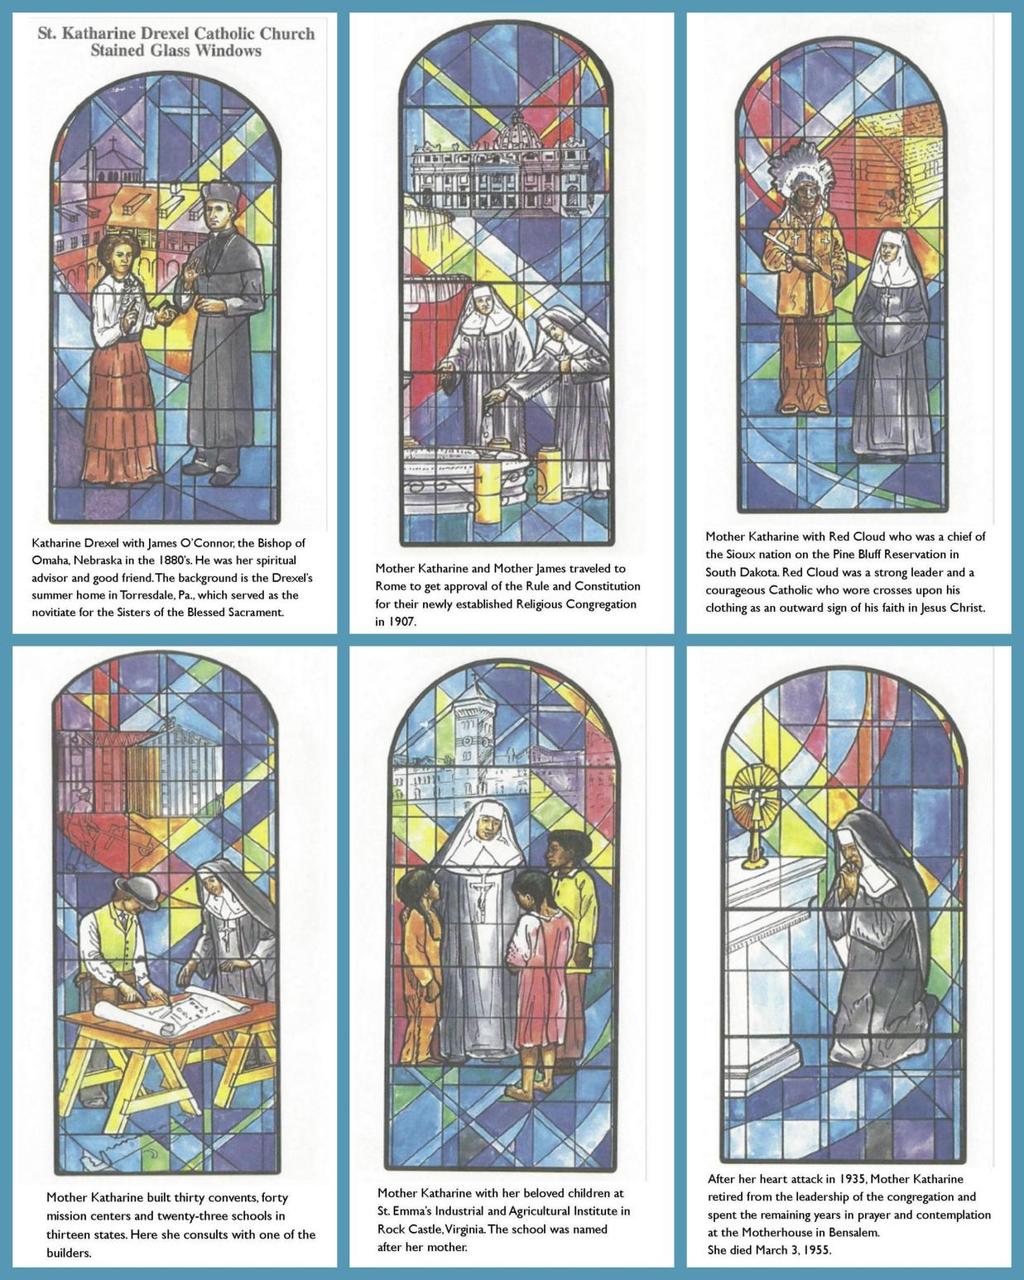 Stained glass windows from SKD Parish in Cape Coral, FL. We are an active faith community of 2500+ families ranging from the very young to our seasoned parishioners.